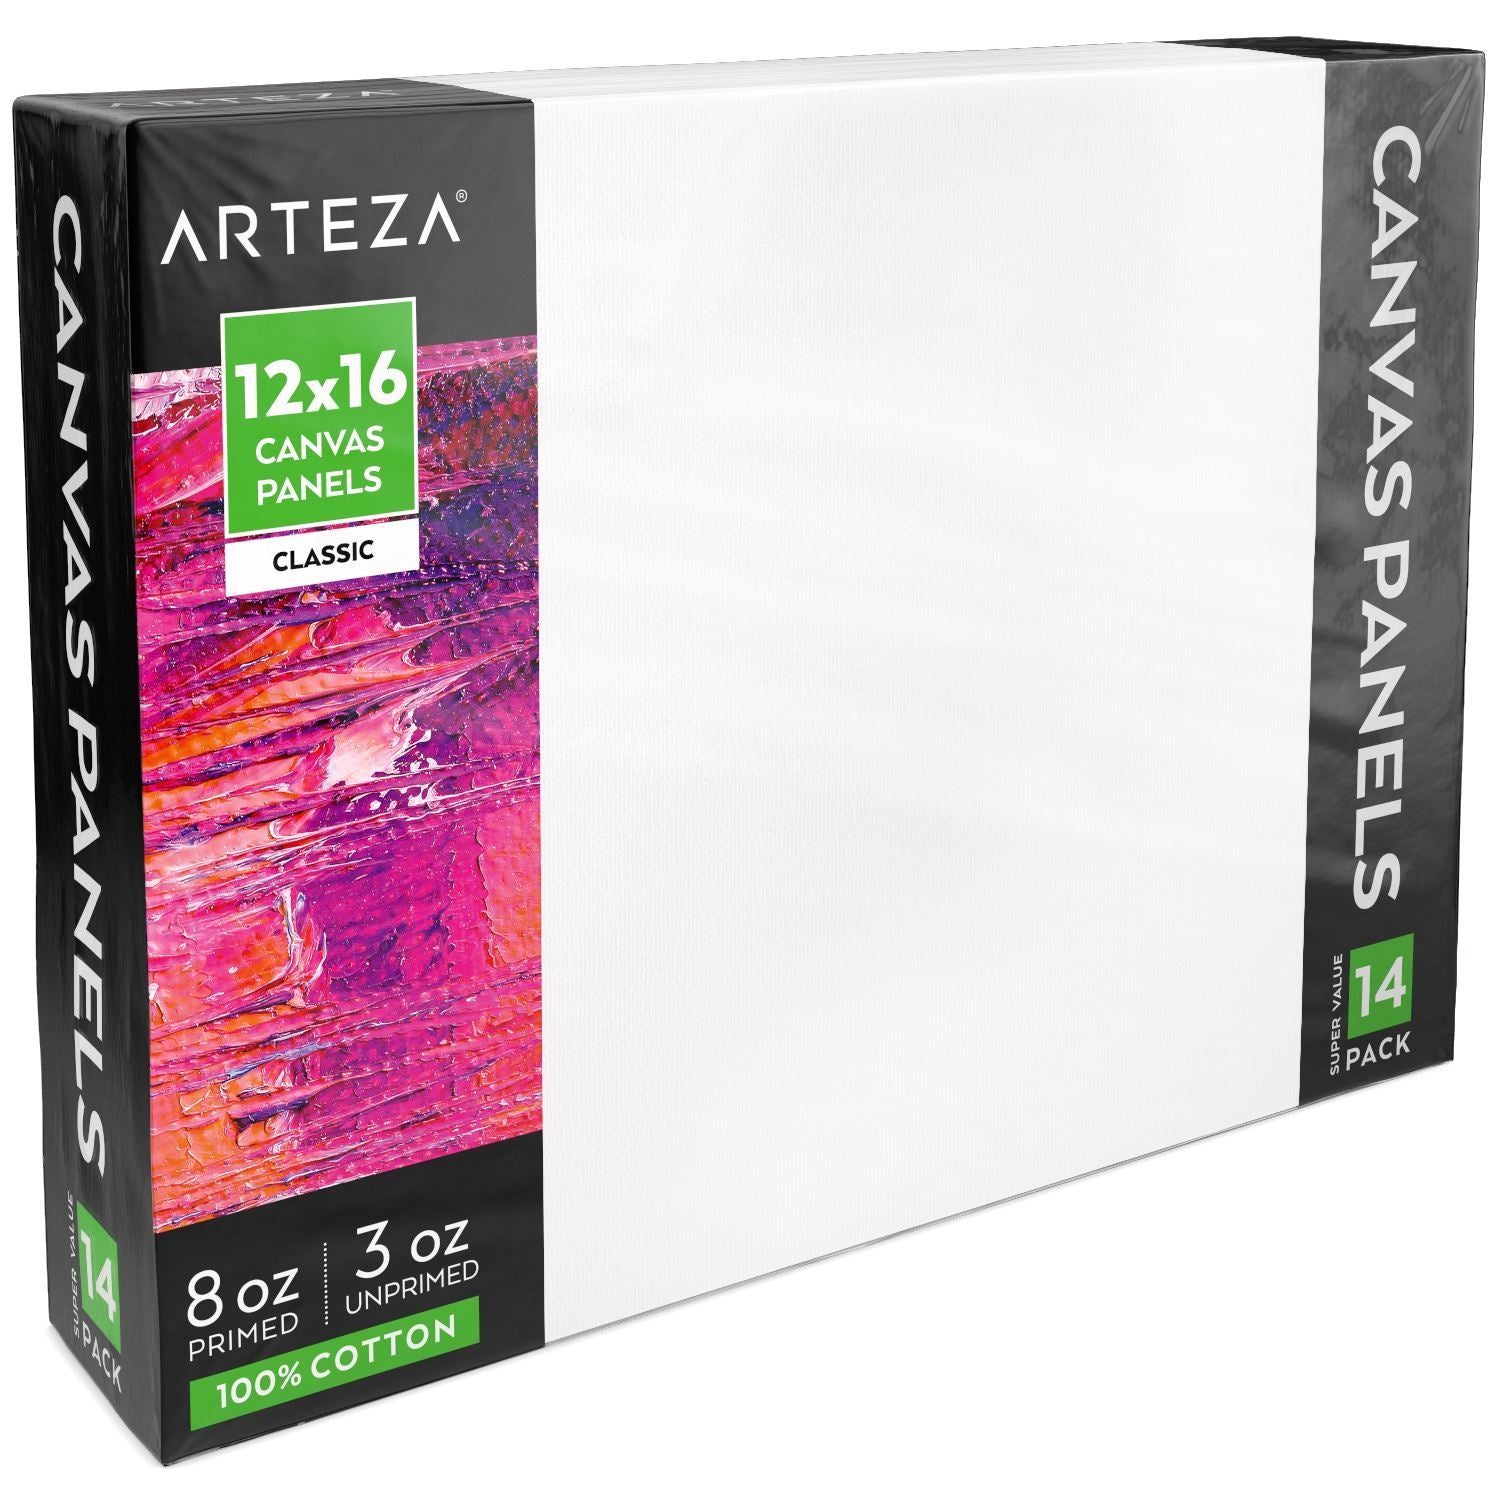  ARTEZA Canvases for Painting, 9x12, 11x14, 12x16, 16x20 Inches,  Blank Art Canvas Boards, 100% Cotton, 8 oz Gesso-Primed, Art Supplies for  Adults, Acrylic Pouring, White (Medium), Multipack of 28